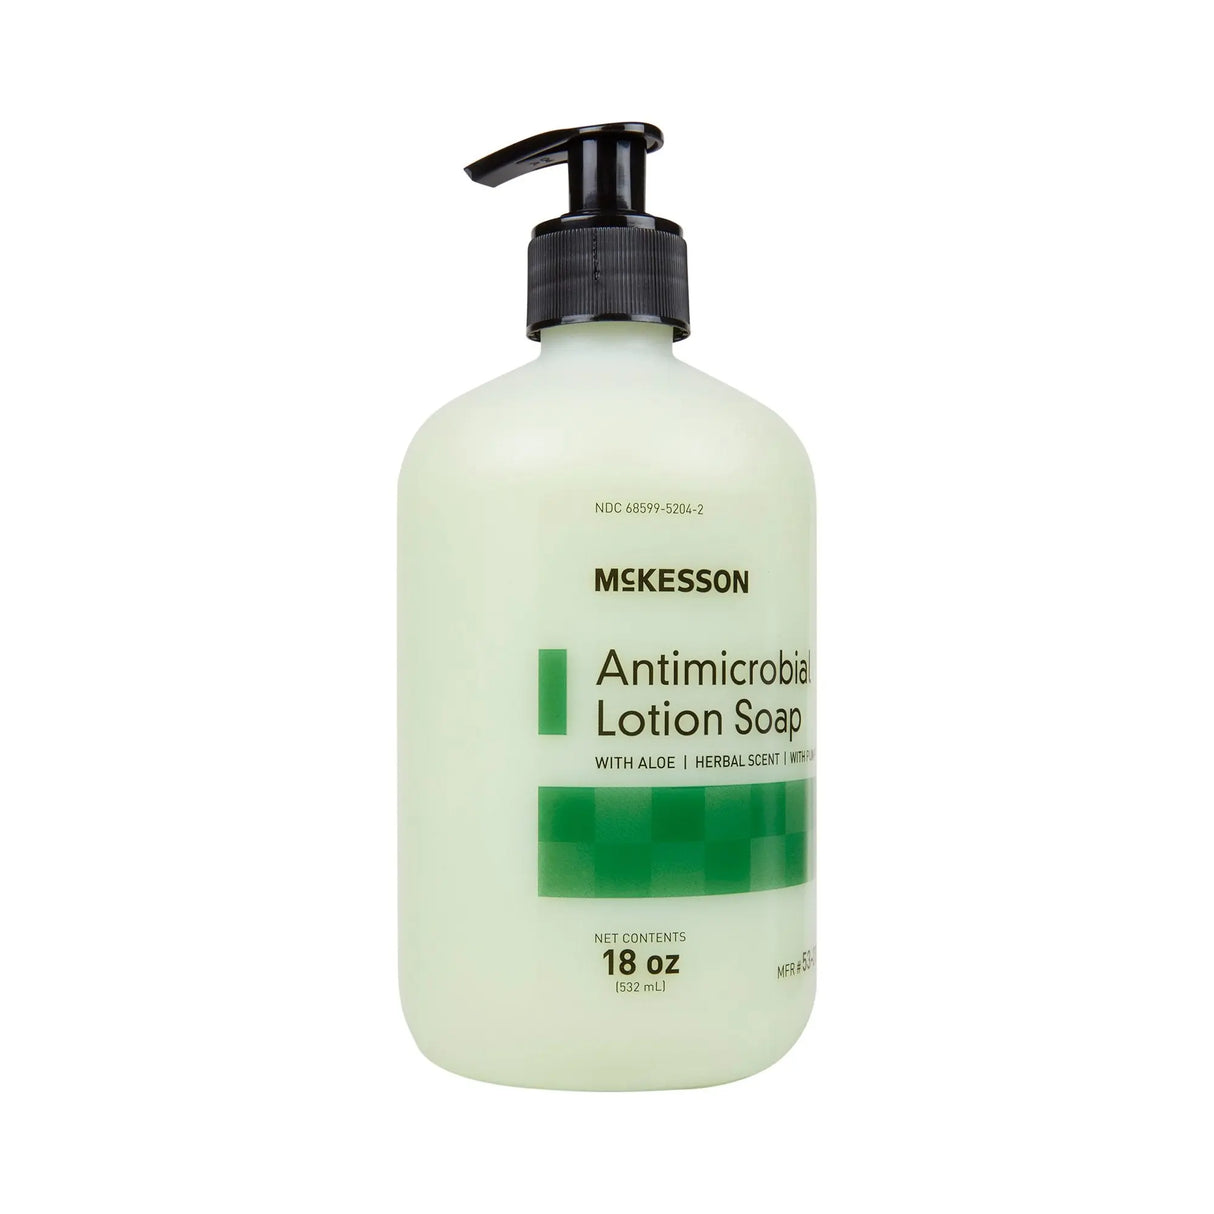 McKesson Antimicrobial Lotion Soap, Herbal Scent, 18 oz, Pump Bottle, Green, 0.95% Strength - getMovility